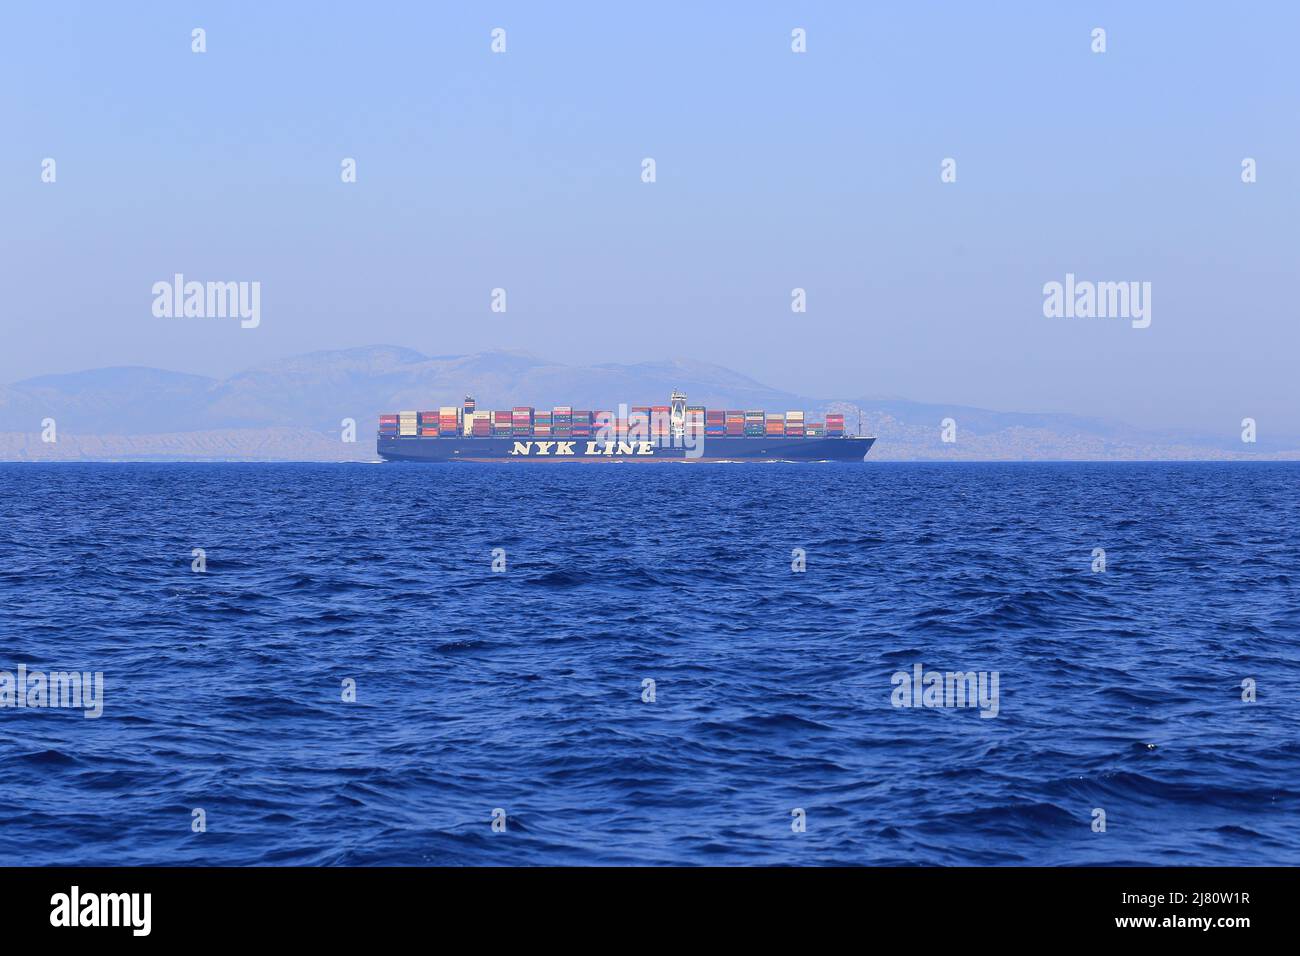 International bulk carrier ship NYK LINE with containers Stock Photo